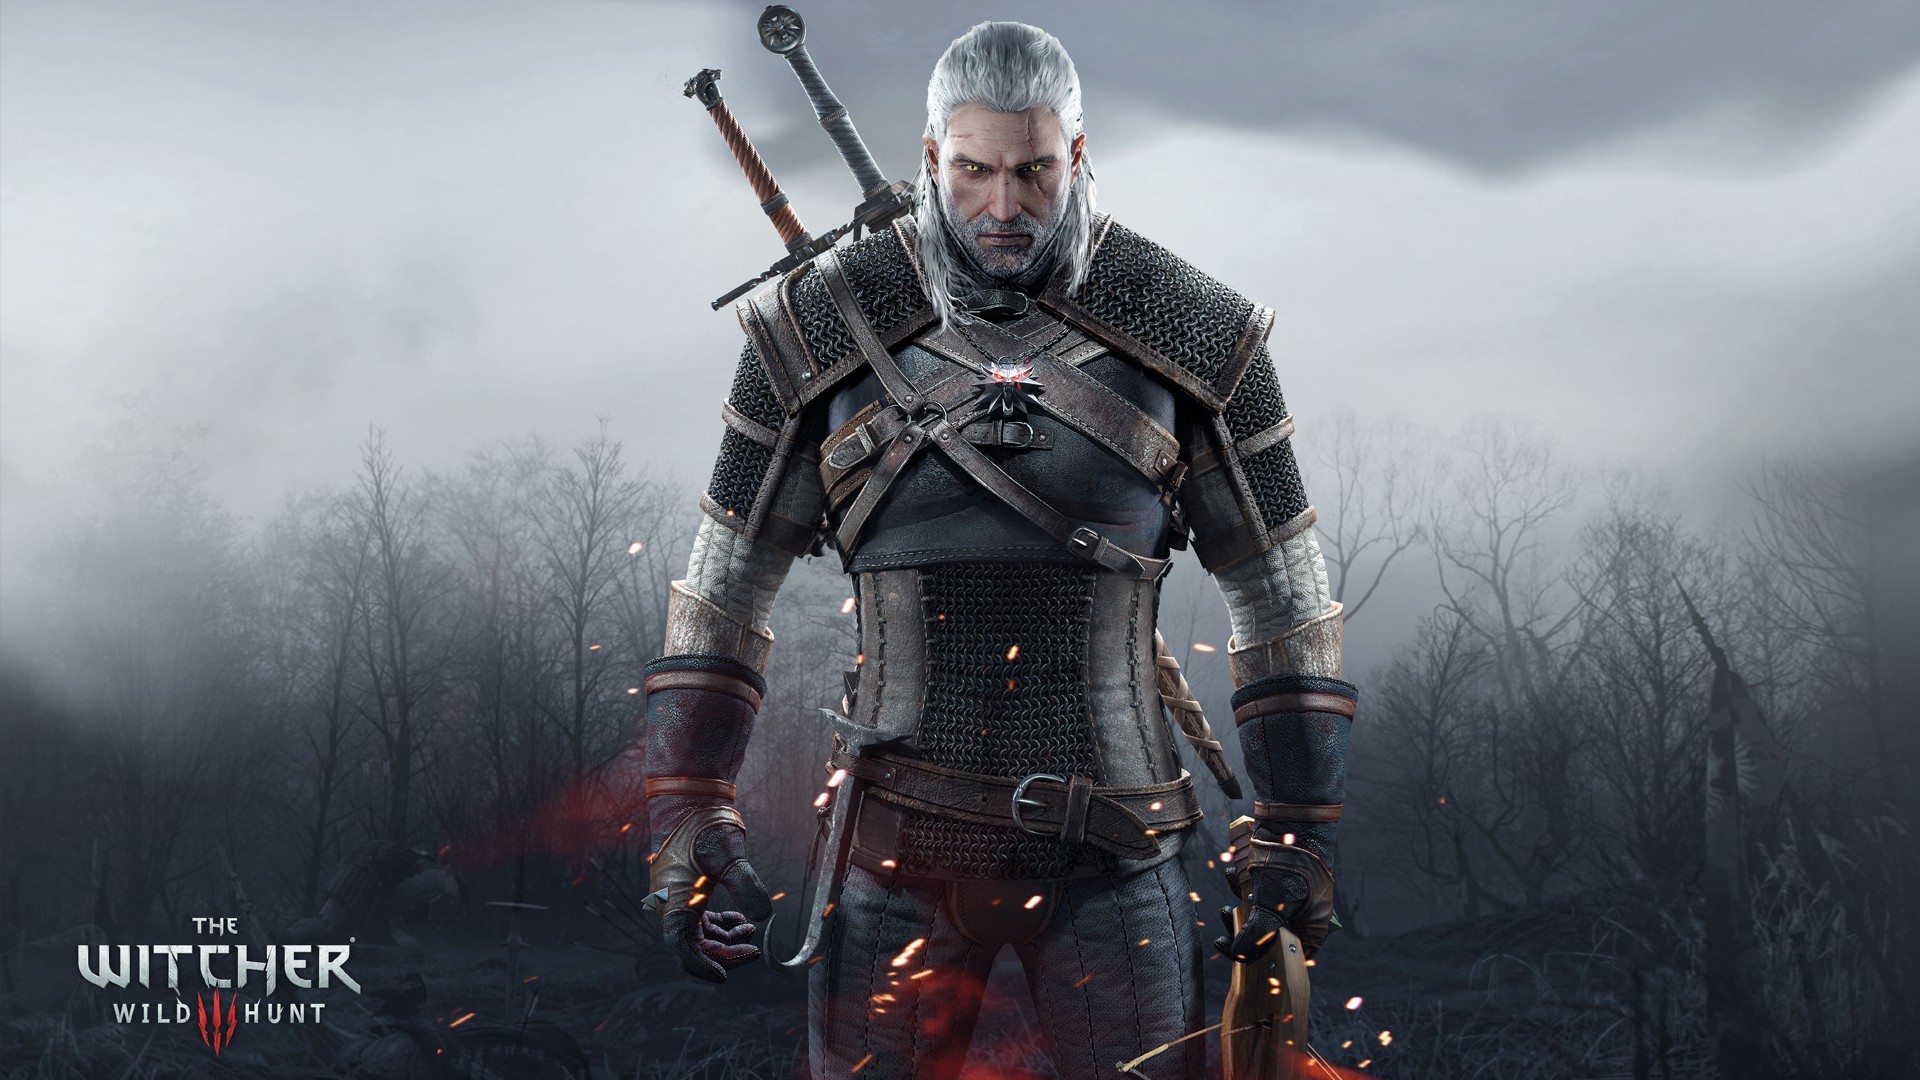 General 1920x1080 Geralt of Rivia The Witcher The Witcher 3: Wild Hunt frontal view video game men men fantasy men CD Projekt RED video game art PC gaming looking at viewer yellow eyes digital art video games